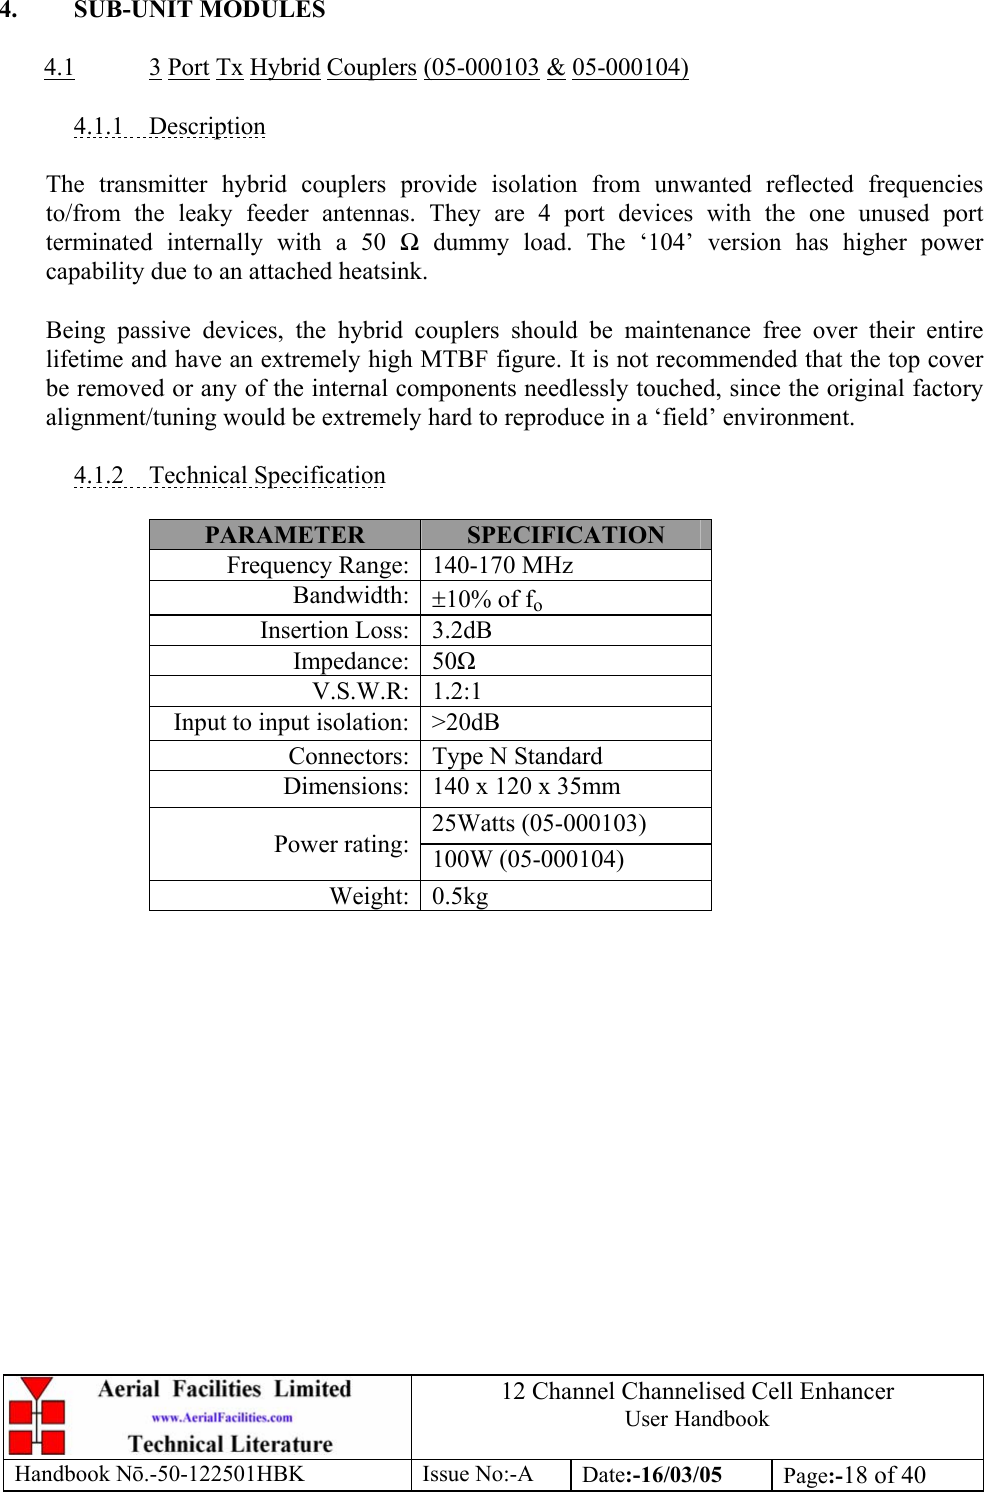 12 Channel Channelised Cell Enhancer User Handbook Handbook N.-50-122501HBK Issue No:-A Date:-16/03/05  Page:-18 of 40   4. SUB-UNIT MODULES  4.1 3 Port Tx Hybrid Couplers (05-000103 &amp; 05-000104)  4.1.1 Description  The transmitter hybrid couplers provide isolation from unwanted reflected frequencies to/from the leaky feeder antennas. They are 4 port devices with the one unused port terminated internally with a 50  dummy load. The ‘104’ version has higher power capability due to an attached heatsink.  Being passive devices, the hybrid couplers should be maintenance free over their entire lifetime and have an extremely high MTBF figure. It is not recommended that the top cover be removed or any of the internal components needlessly touched, since the original factory alignment/tuning would be extremely hard to reproduce in a ‘field’ environment.  4.1.2 Technical Specification  PARAMETER  SPECIFICATION Frequency Range: 140-170 MHz Bandwidth: ±10% of fo Insertion Loss: 3.2dB Impedance: 50 V.S.W.R: 1.2:1 Input to input isolation: &gt;20dB Connectors: Type N Standard  Dimensions: 140 x 120 x 35mm 25Watts (05-000103) Power rating: 100W (05-000104) Weight: 0.5kg  